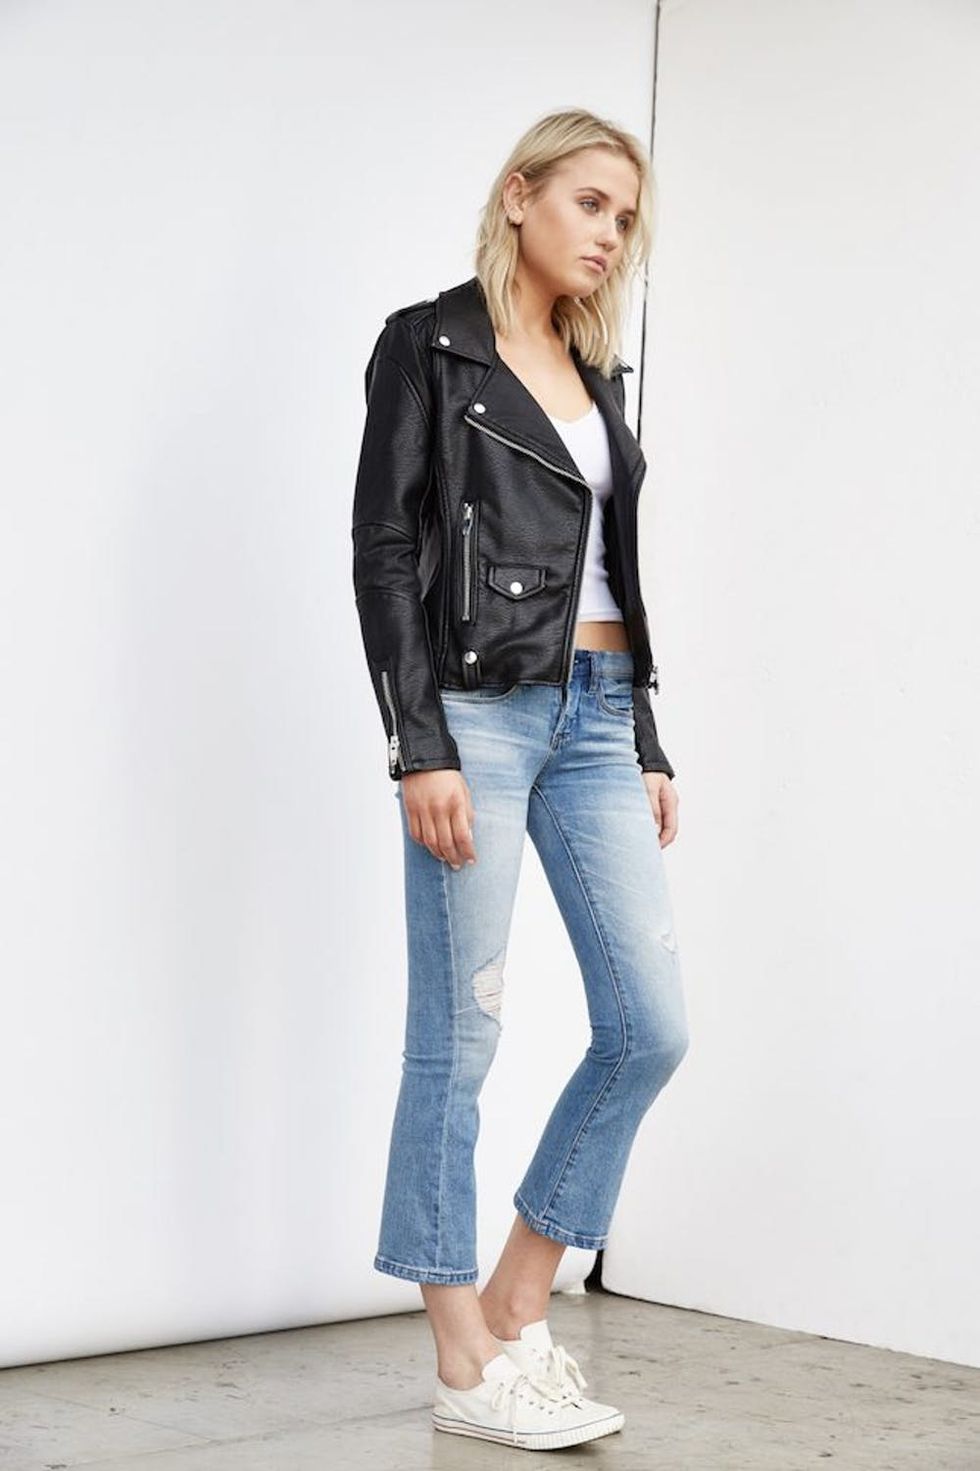 Shop These Brands for Amazing Jeans Under $100 - Brit + Co